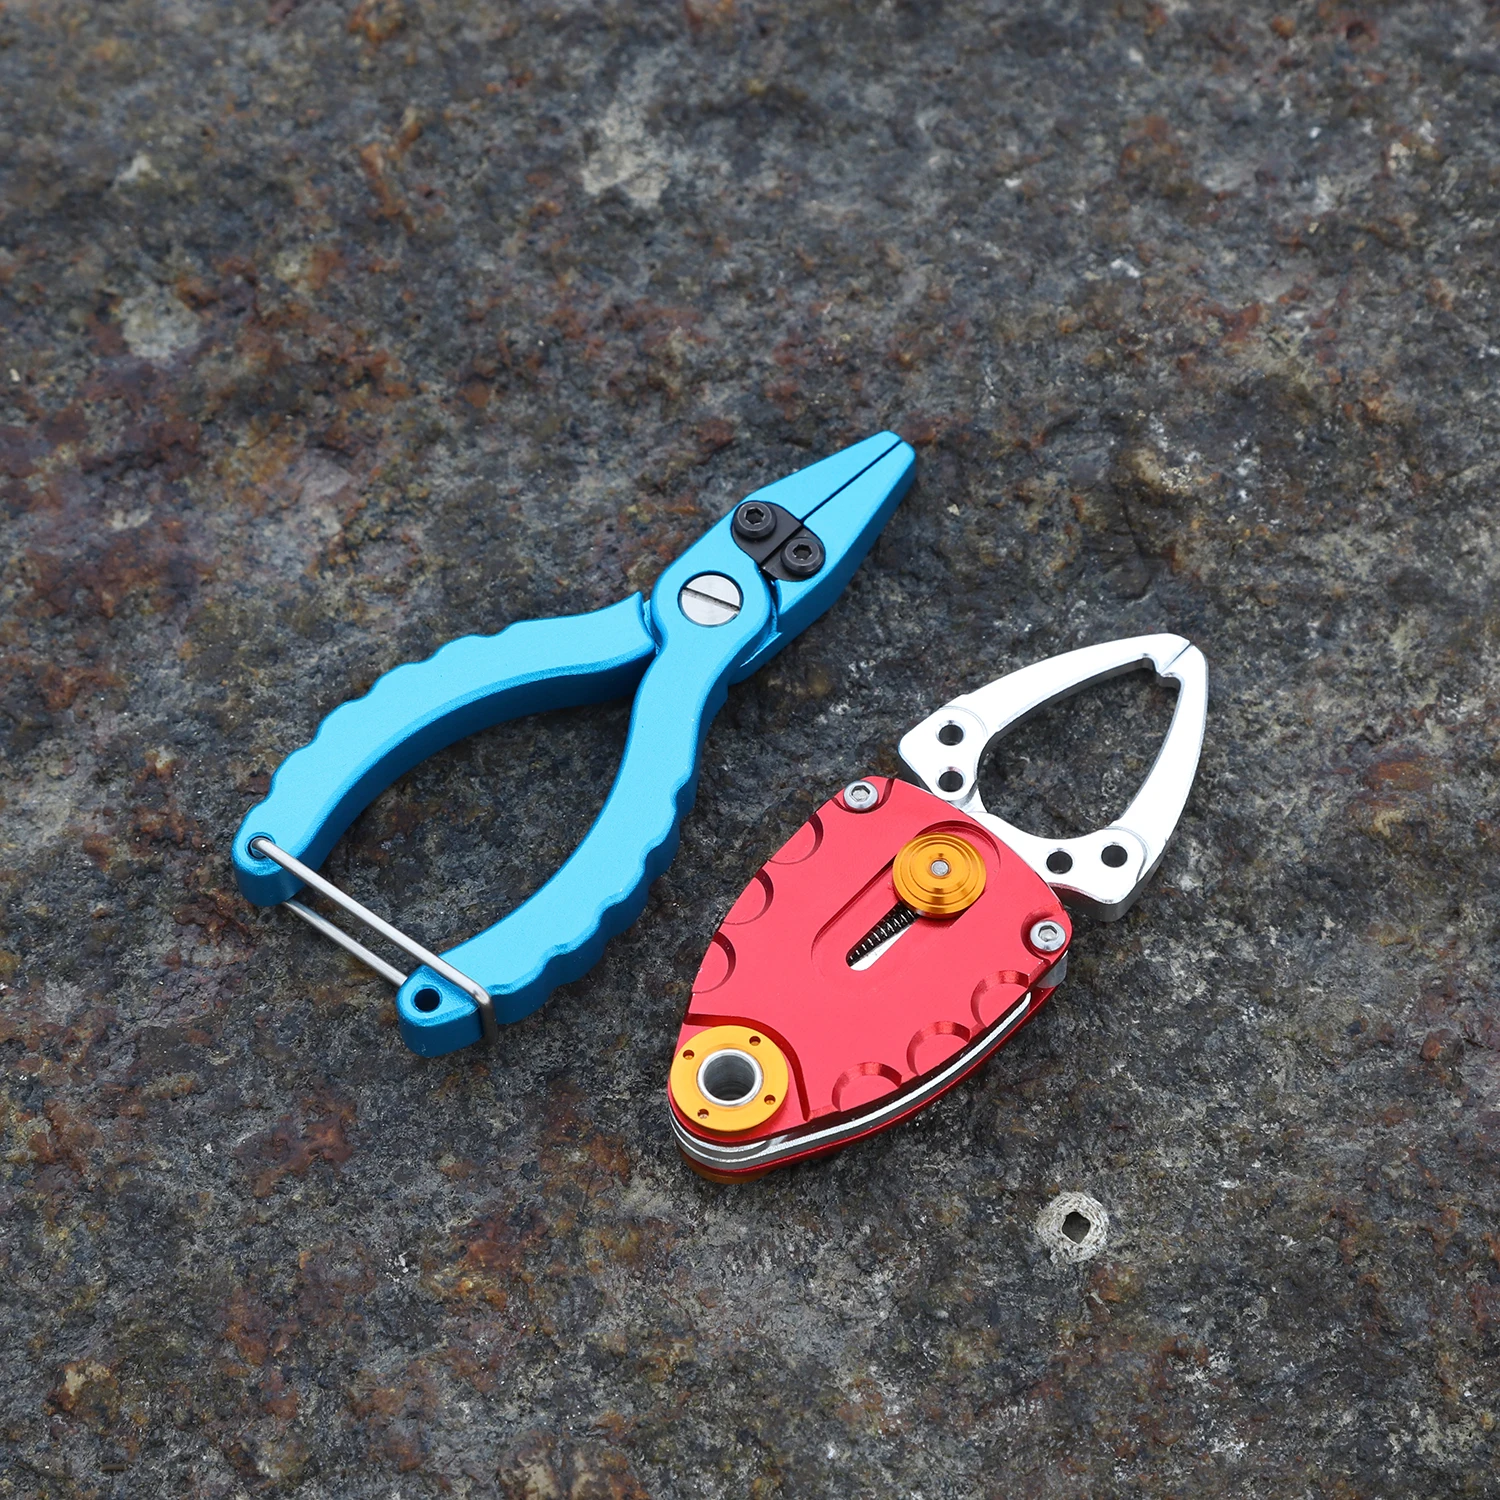 

New Mini Fishing Pliers Grip Set Aluminium Saltwater Tongs for Line Cutter Fish Controller Lure Fishing Tackle Tool Equipment